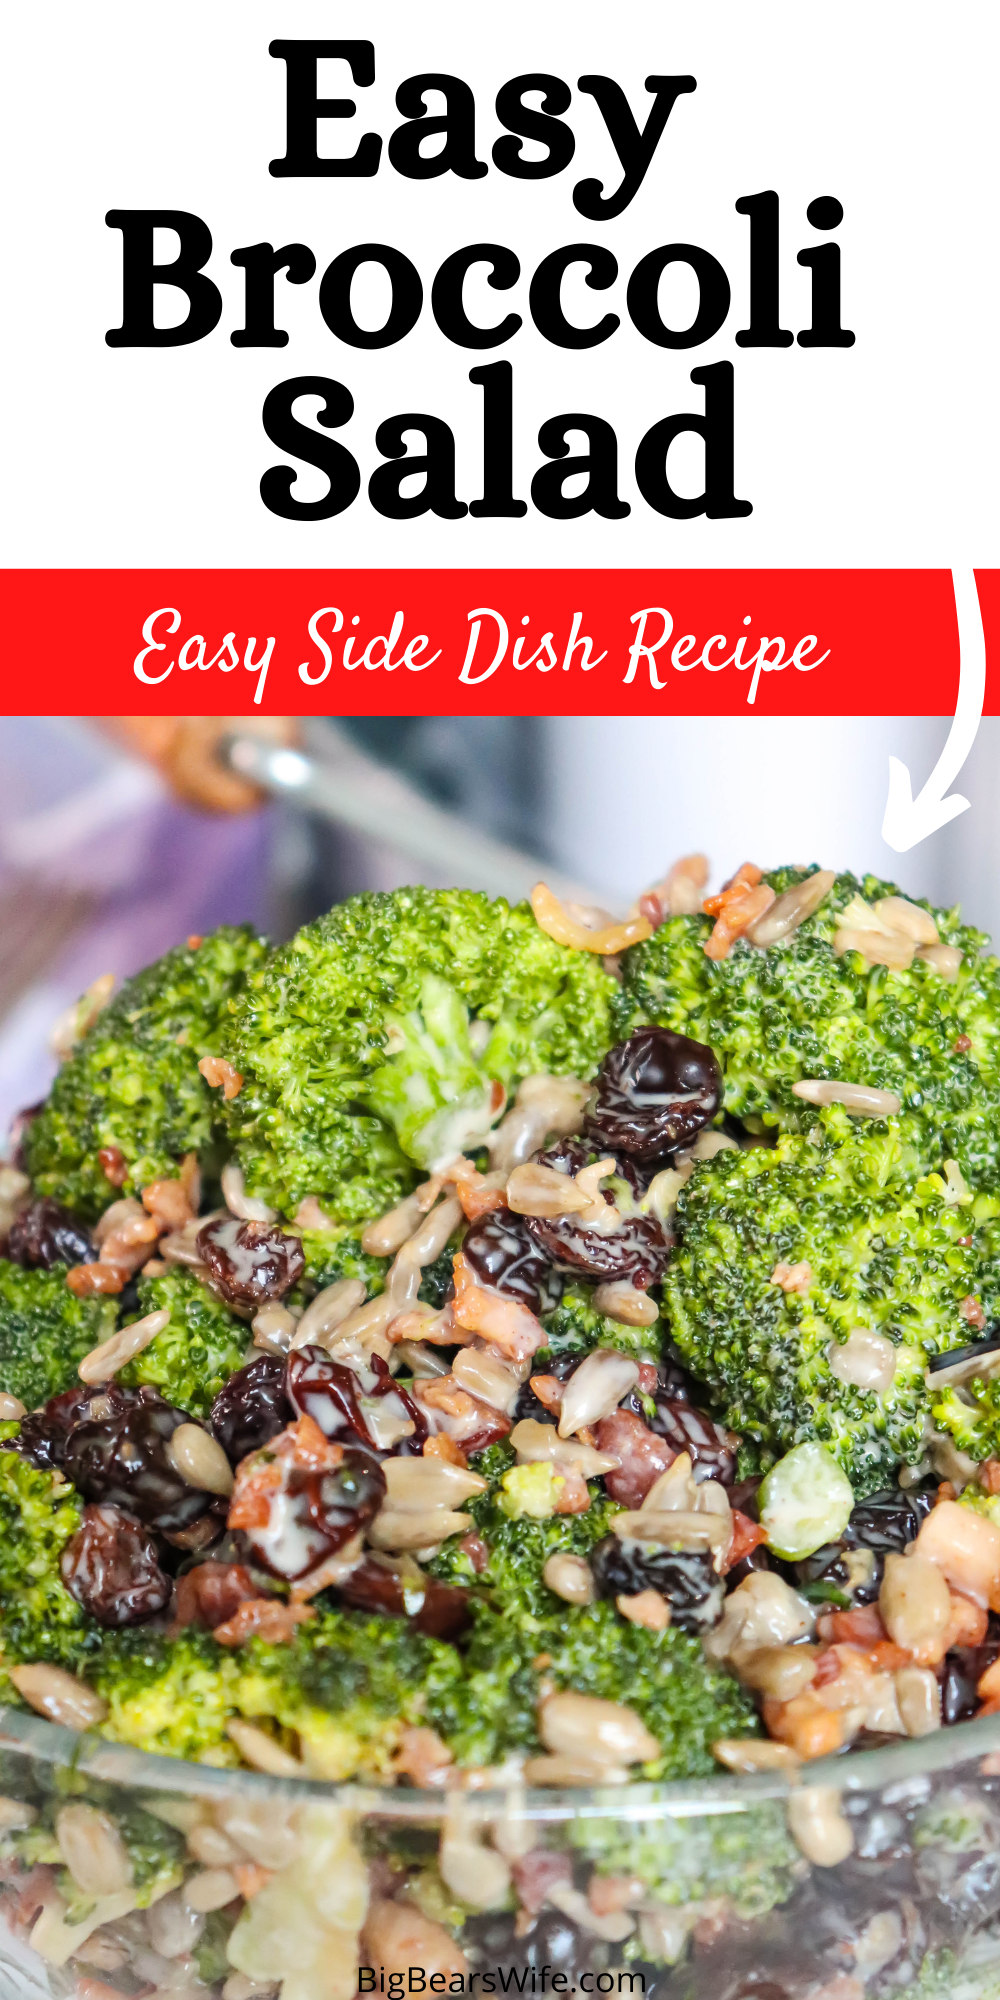 A perfectly Easy Broccoli Salad that's perfect as a side dish, great for picnics and perfect for cookouts! This make-ahead side dish is mixtures of  fresh broccoli, sunflower seeds, raisins and bacon bits that has been tossed in a sweet southern dressing and chilled!  via @bigbearswife